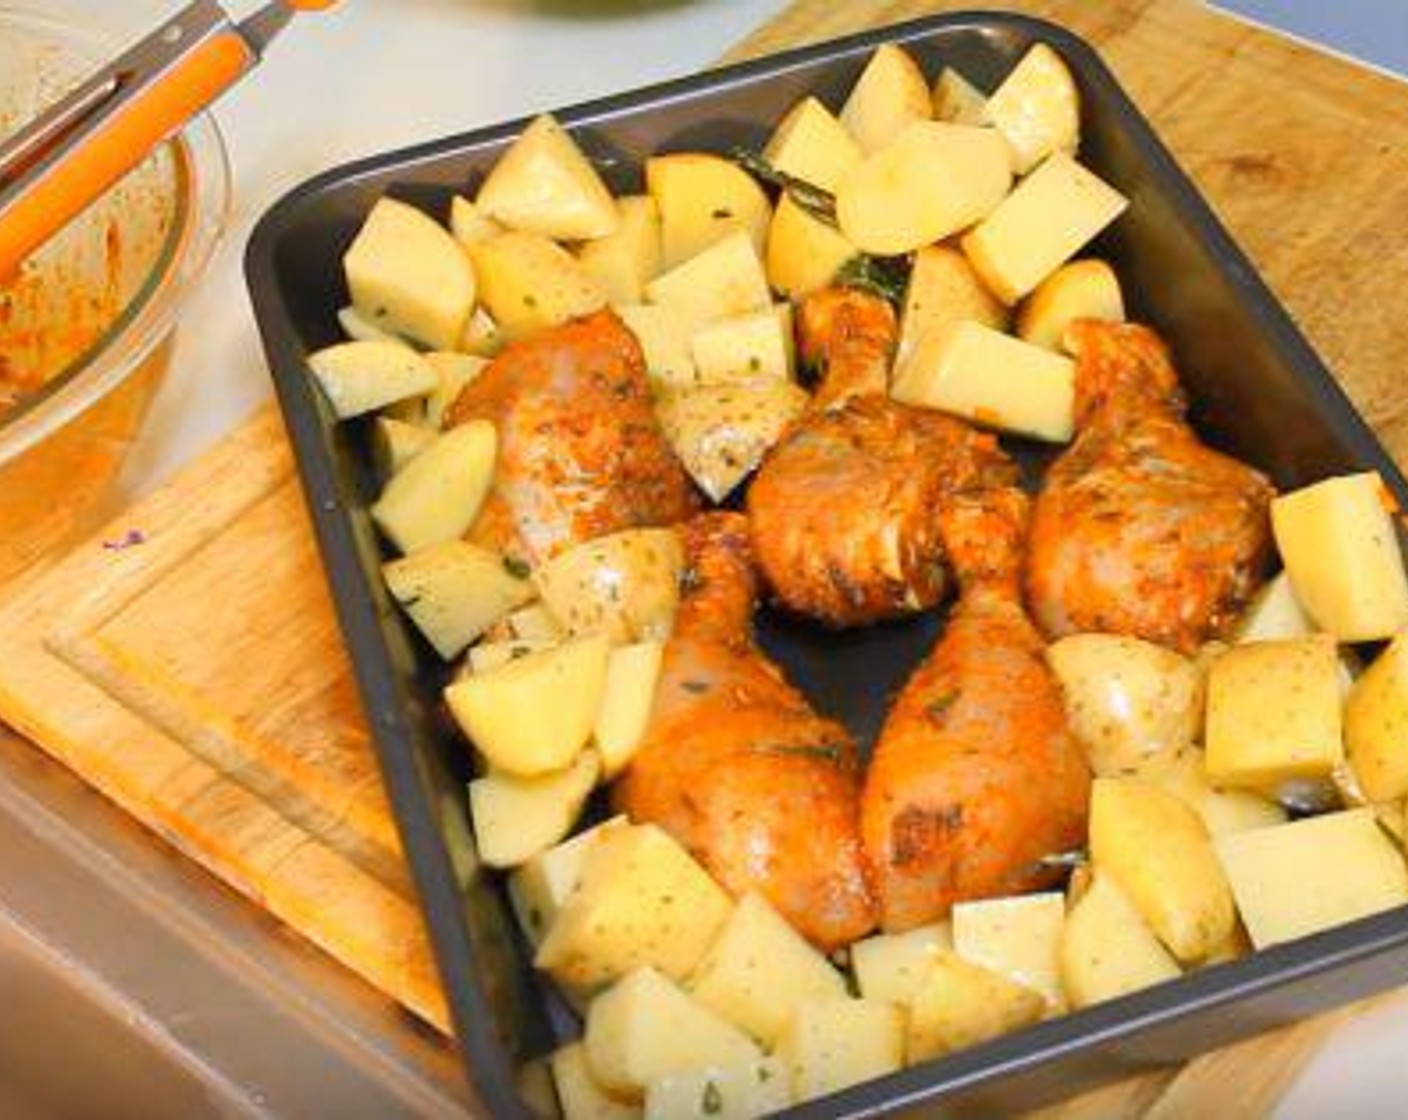 step 4 In a 9 x 19 inch pan, lay the chicken pieces in the middle. Sprinkle the potatoes around the chicken. Cook at 425 degrees F (220 degrees C) for 60-70 minutes.